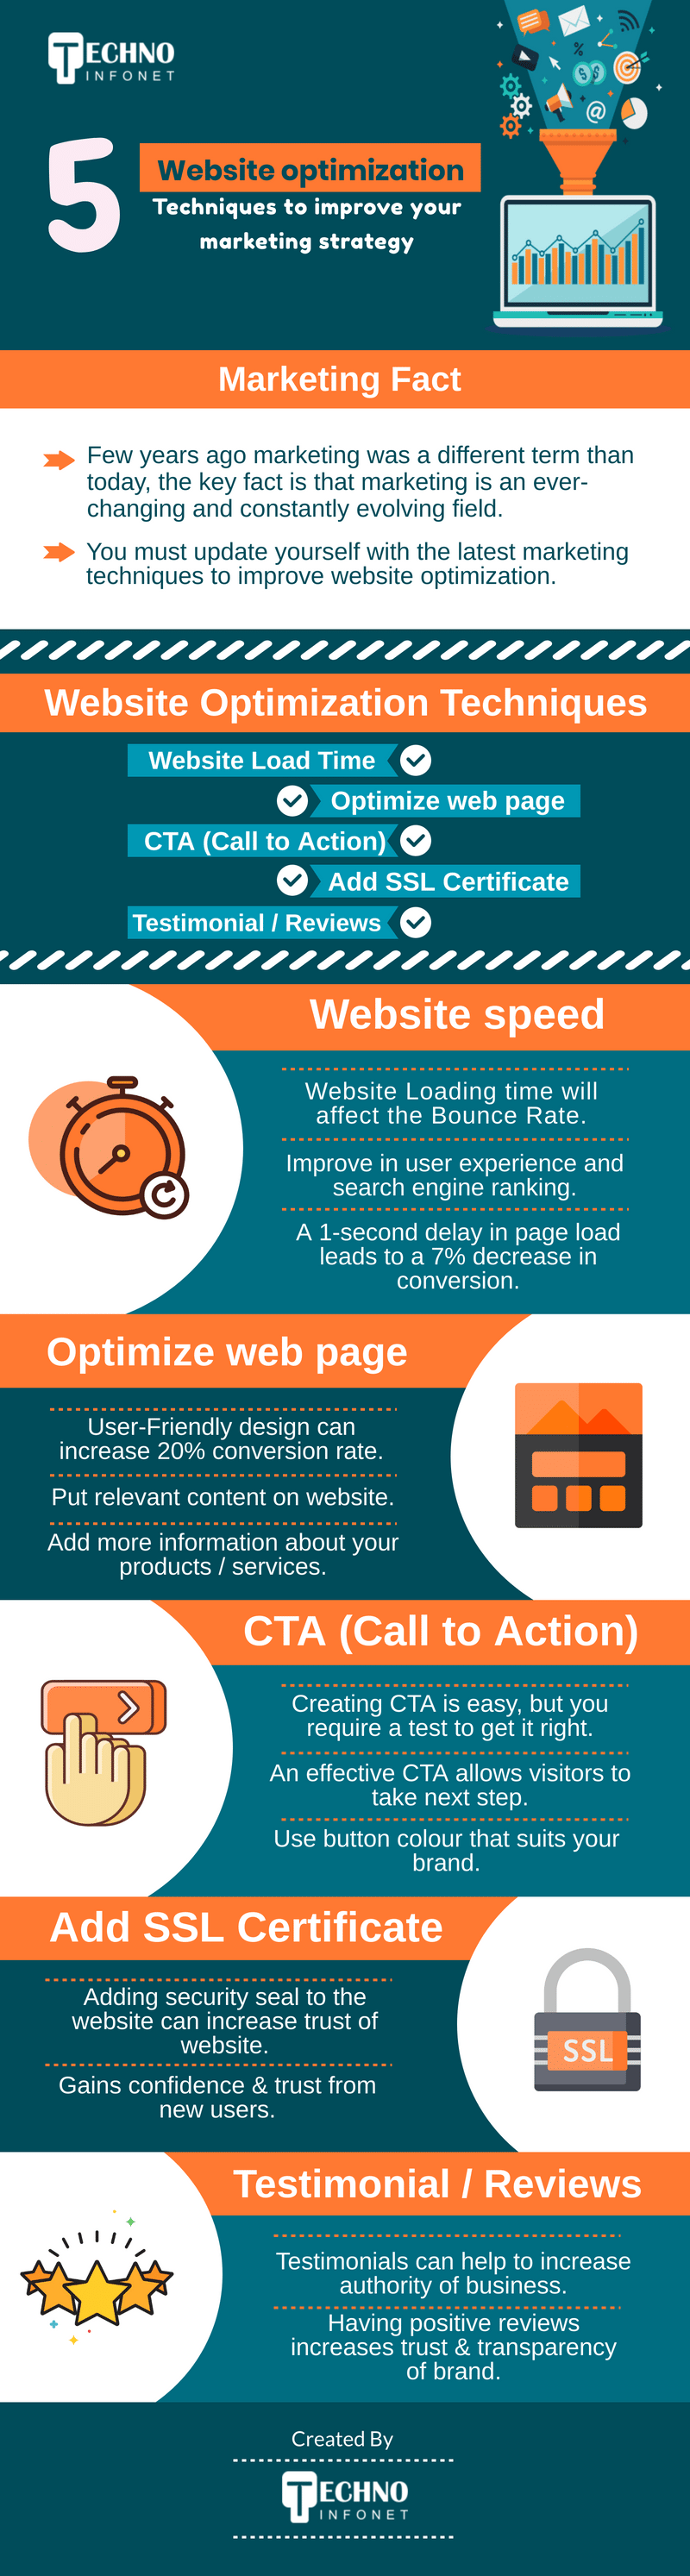 5 Website optimization techniques to improve your marketing strategy